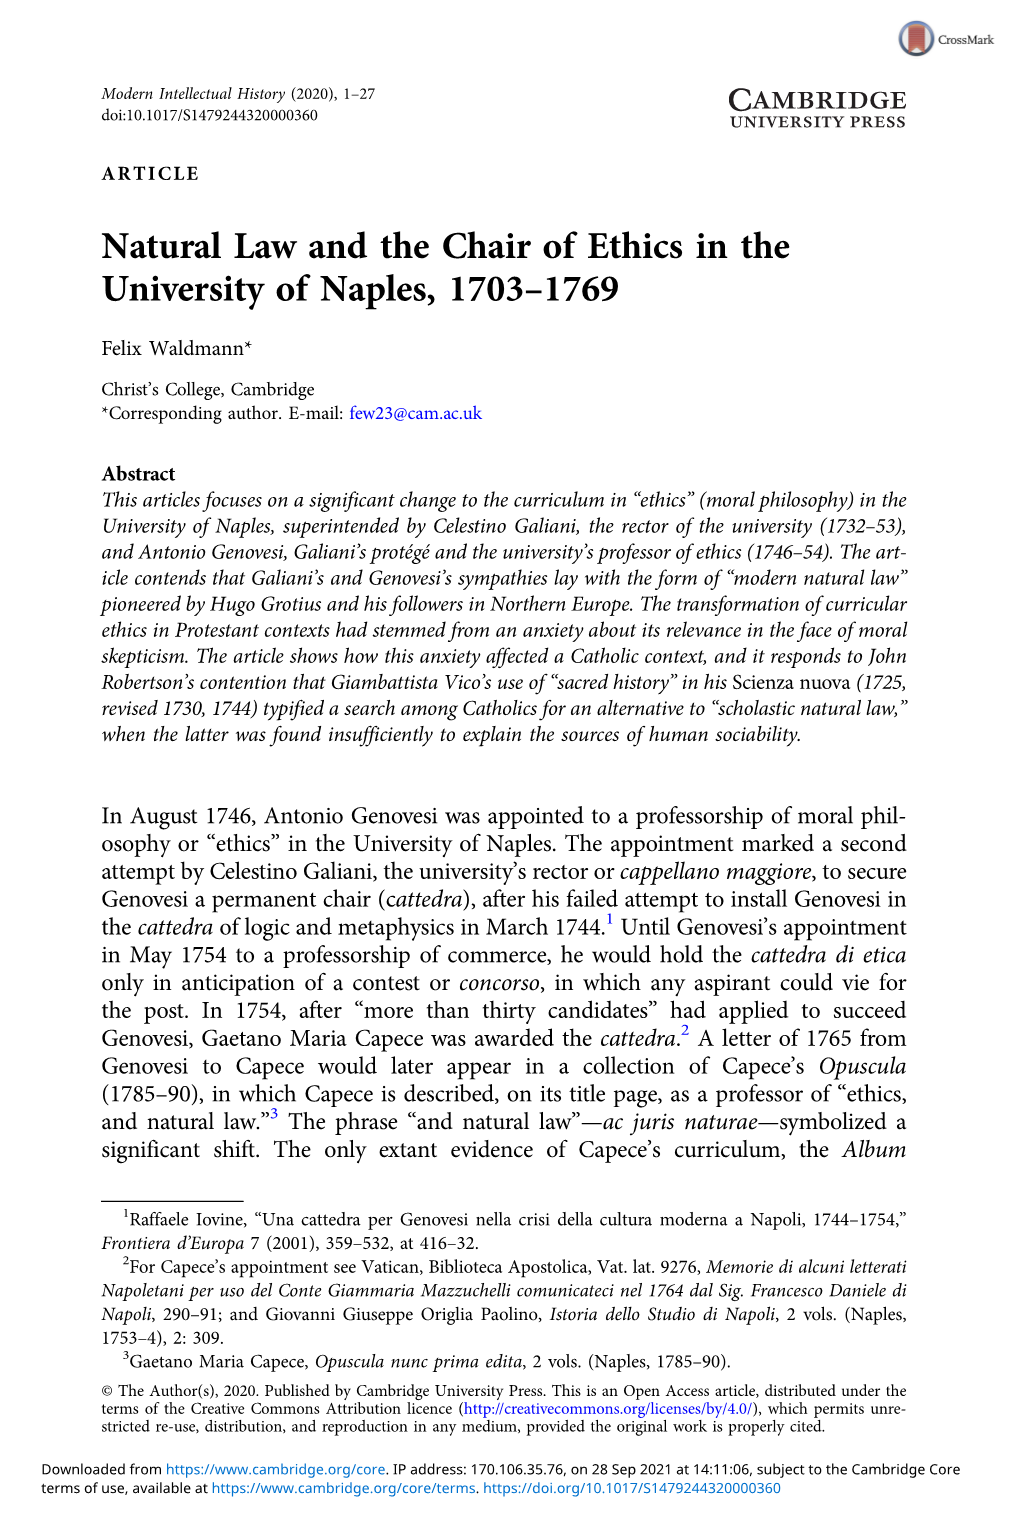 Natural Law and the Chair of Ethics in the University of Naples, 1703–1769